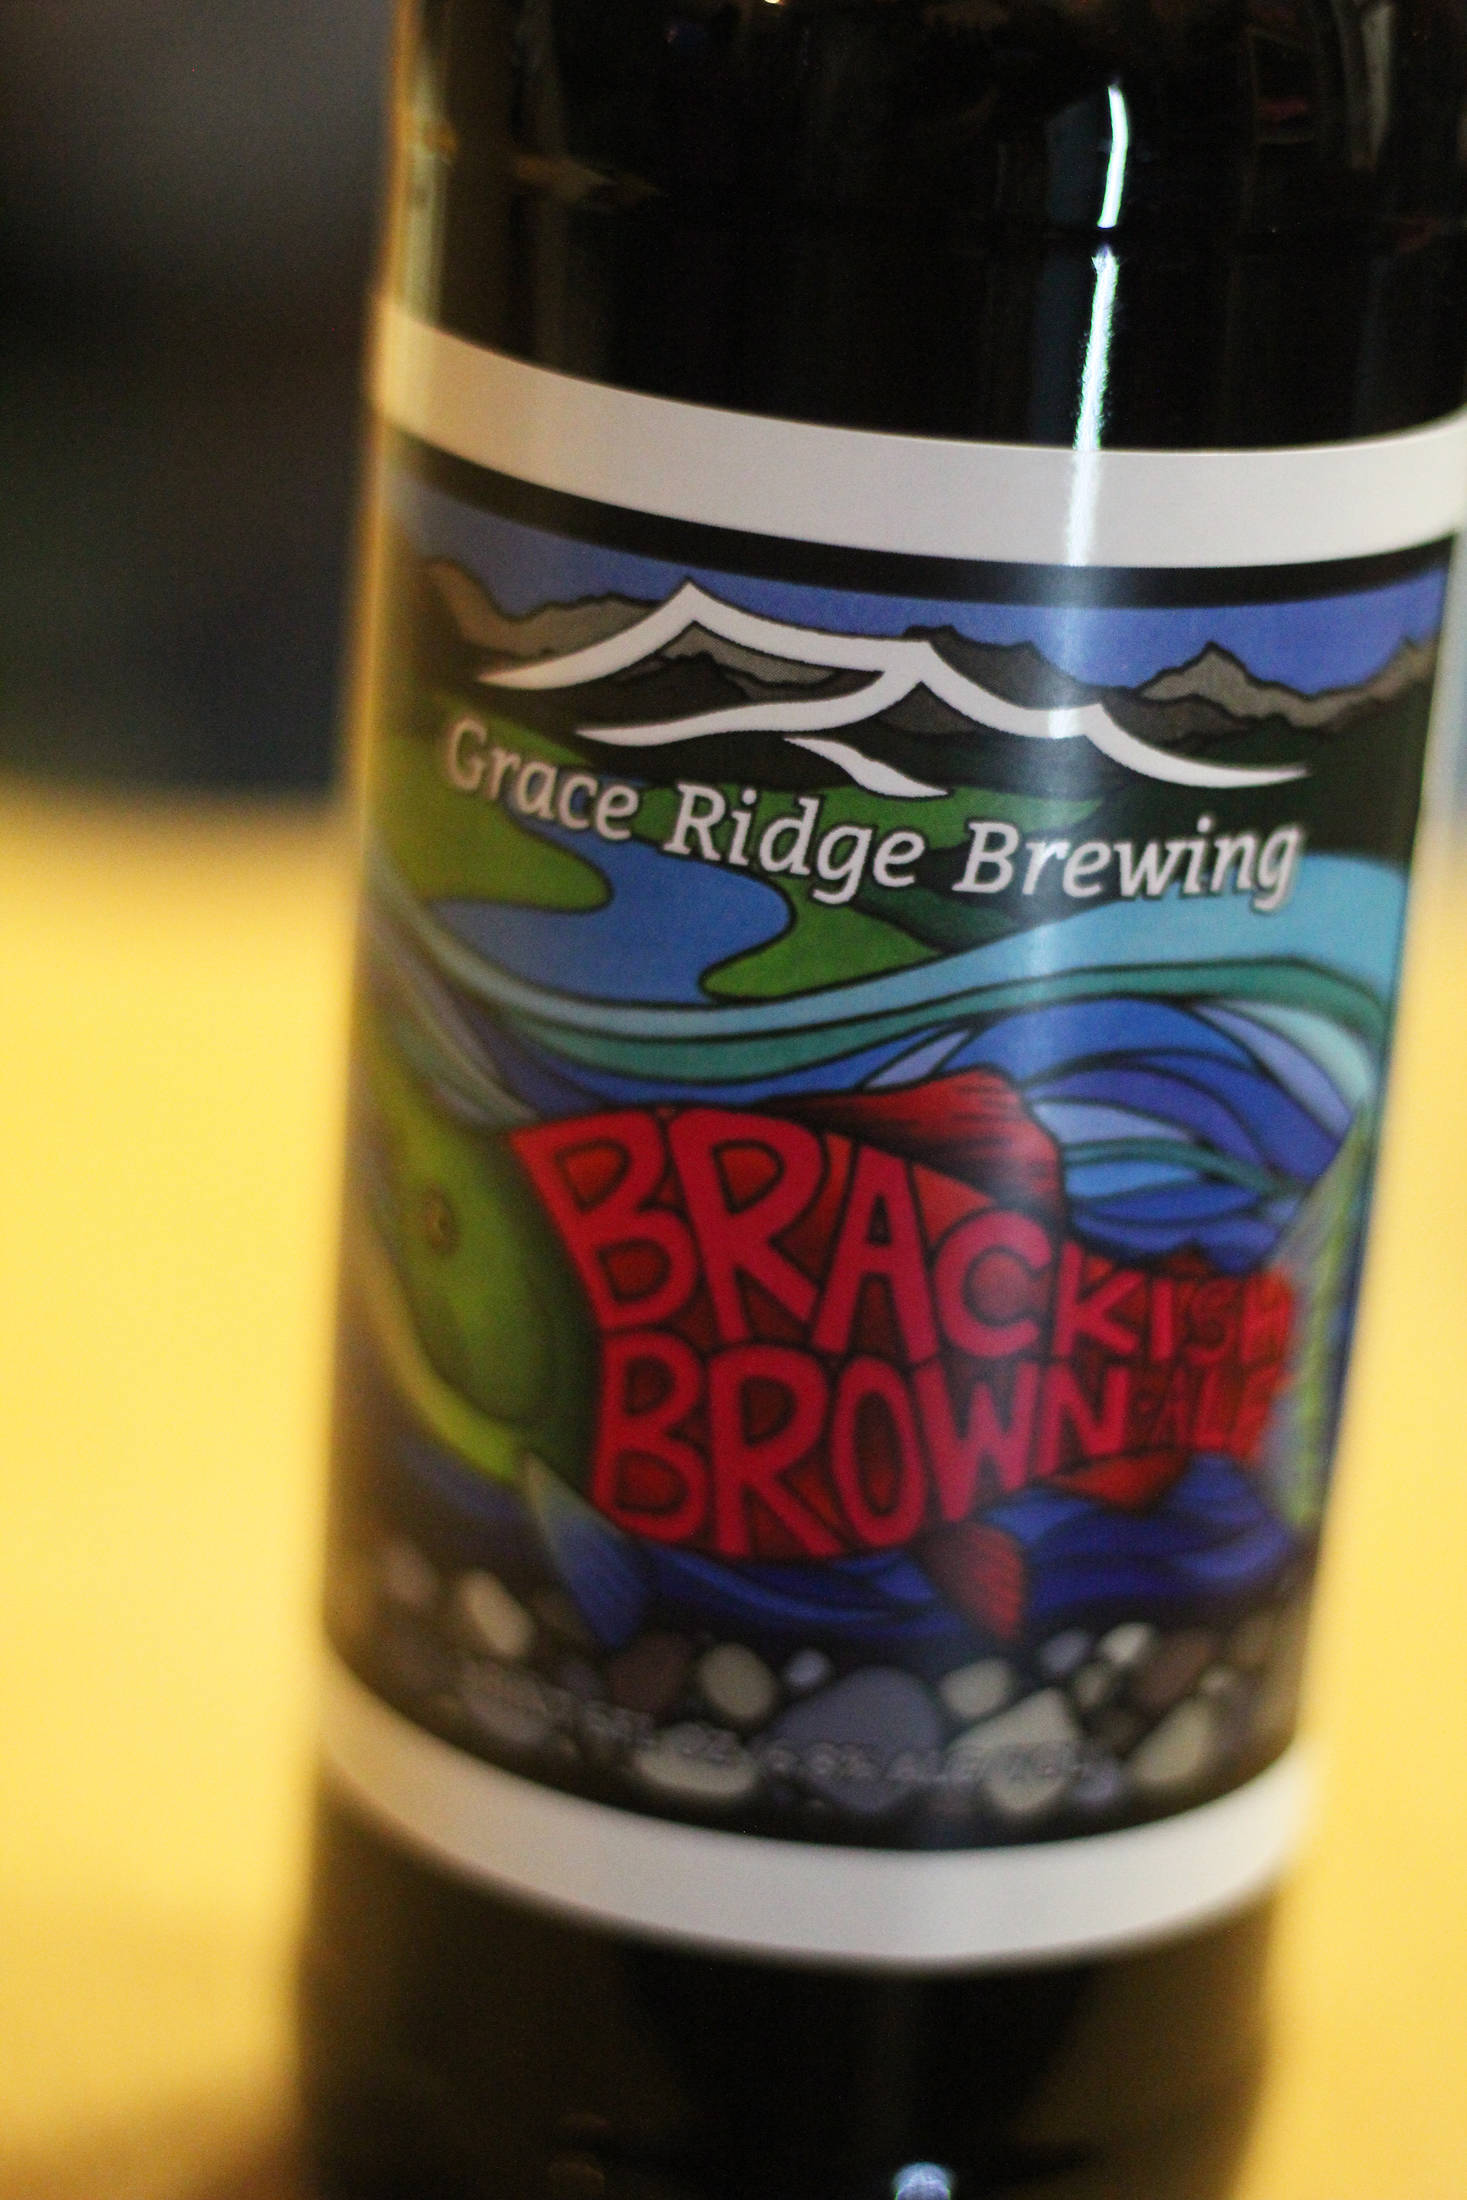 The winning label for the Brackish Brown ale rest on the counter at Grace Ridge Brewery on Friday, Feb. 1, 2019 at a First Friday event in Homer, Alaska. (Photo by Megan Pacer/Homer News)